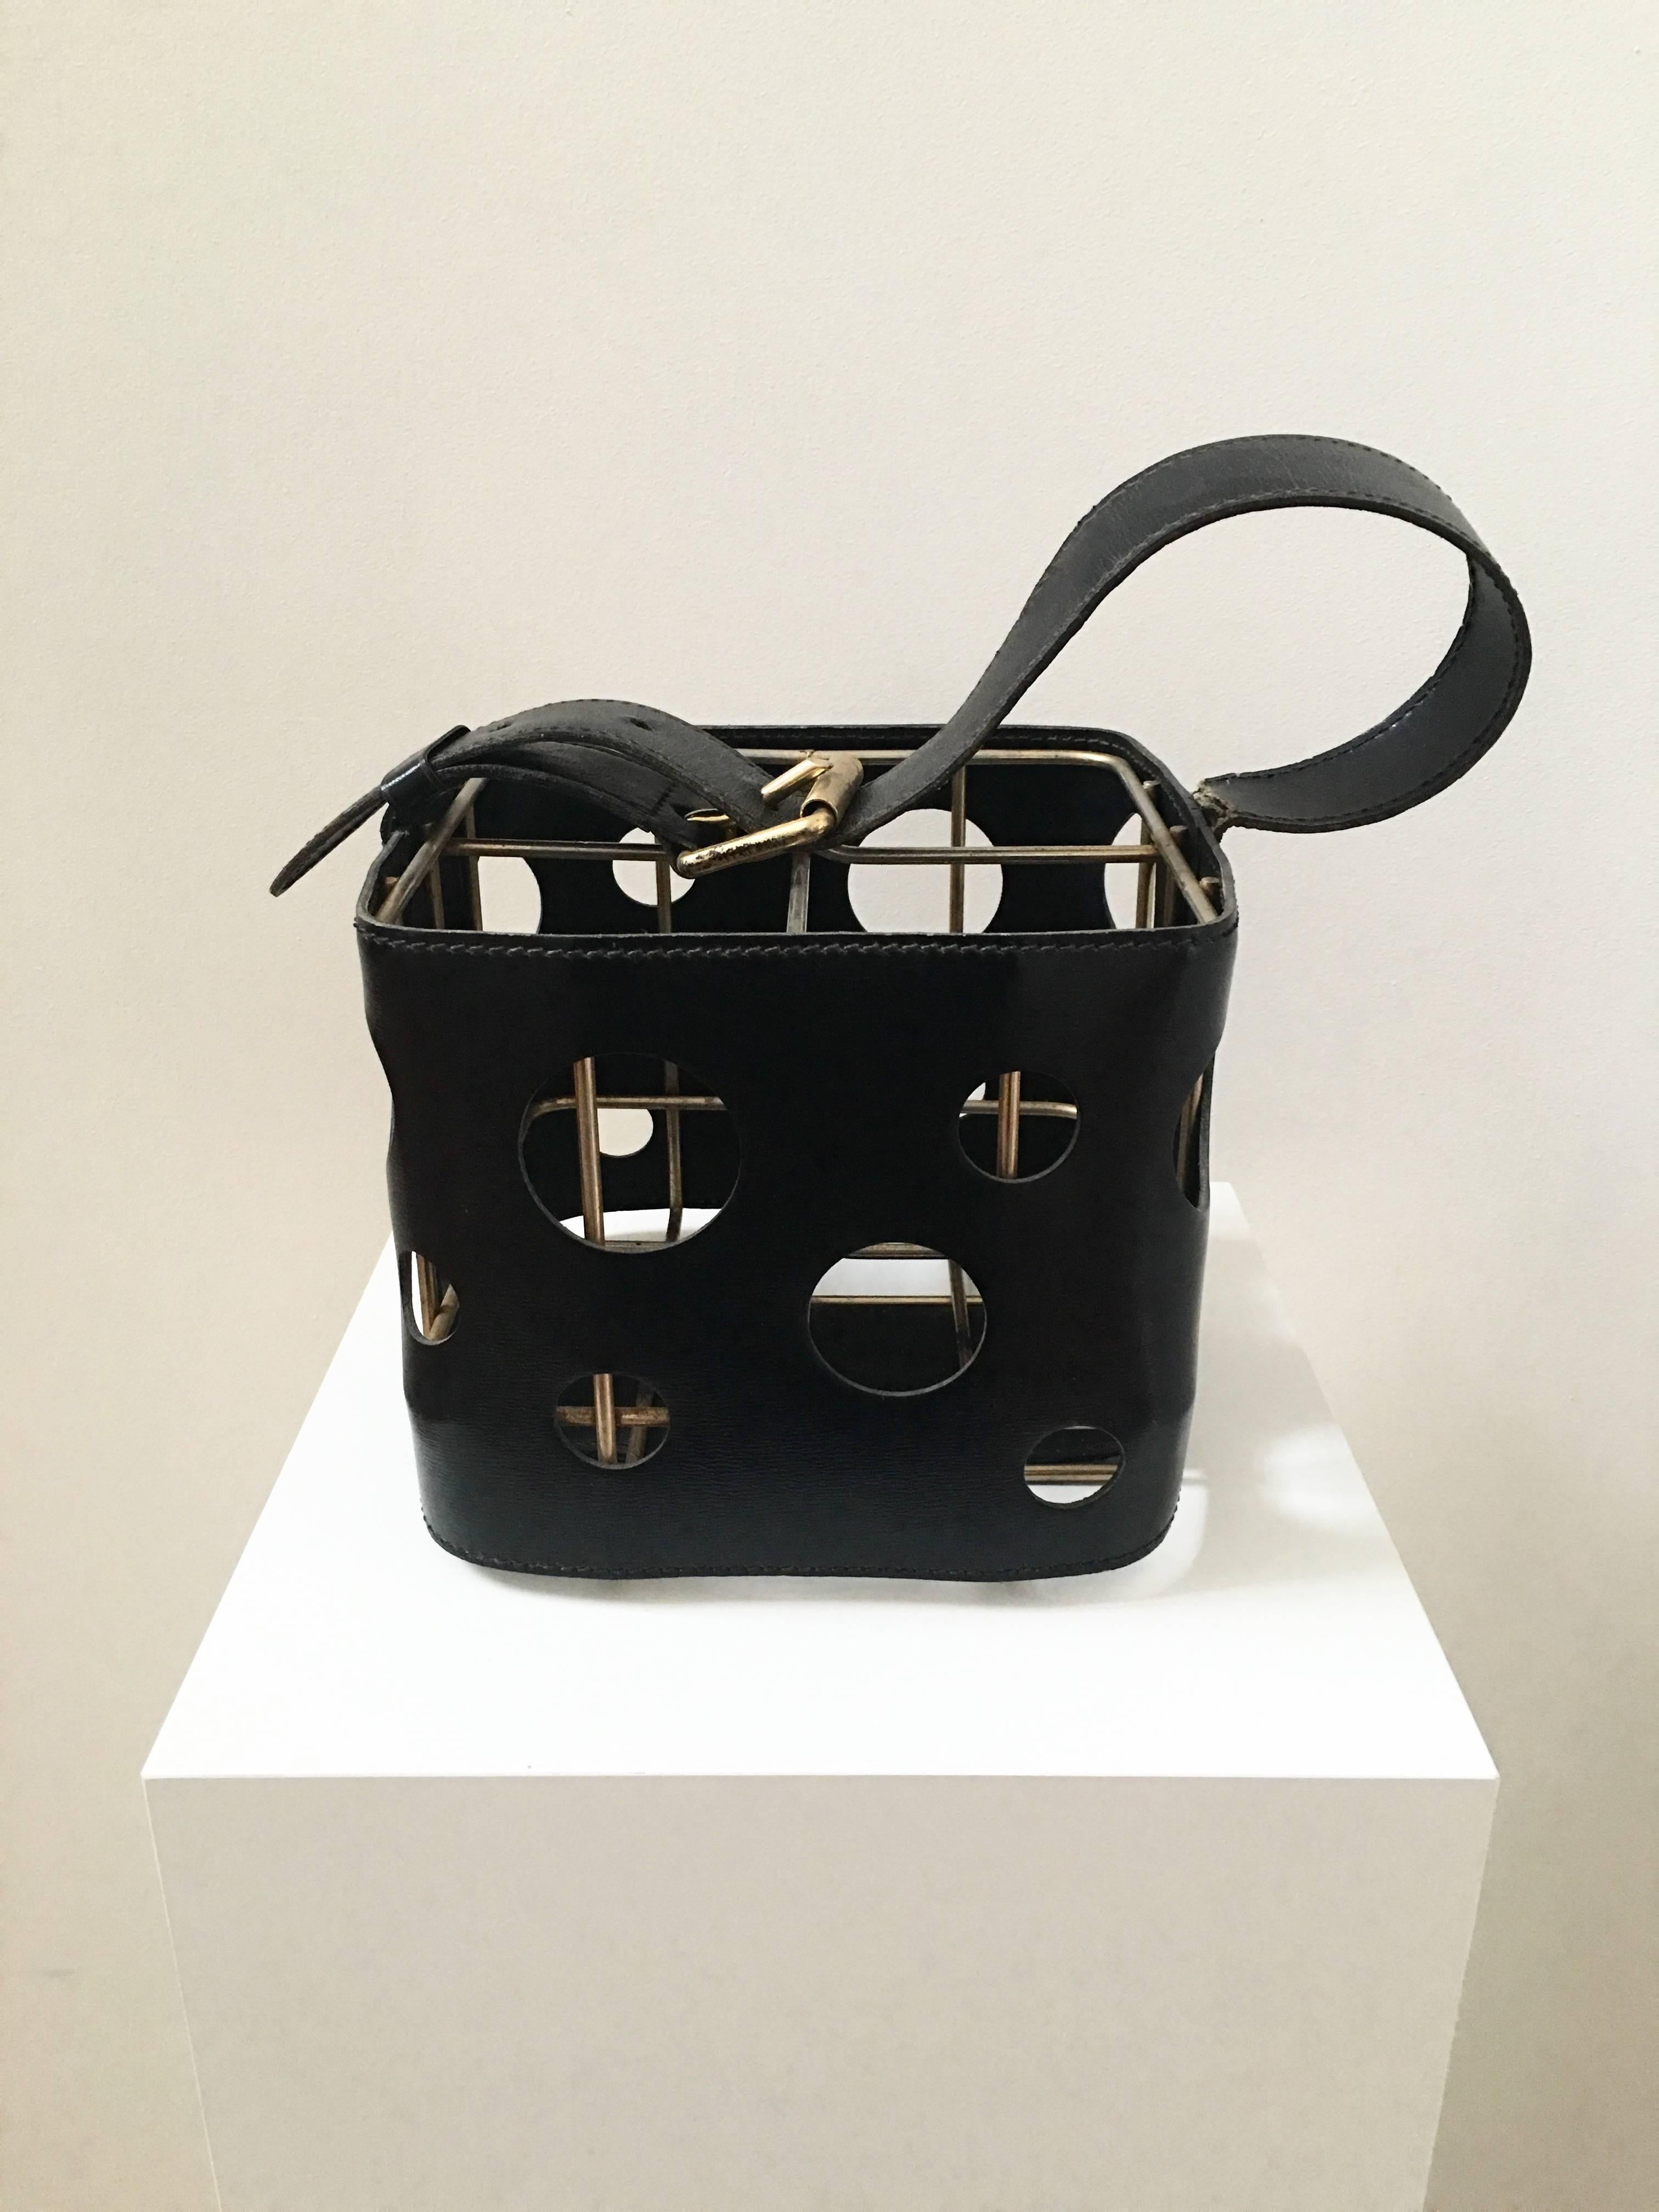 Uber stylish black leather caddy for wine/bottles is attributed to Jacques Adnet (1901-1984). Holes of varying sizes are created on the black leather that wraps a brass frame. The leather belt and brass buckle add a nice touch to this piece. Perfect